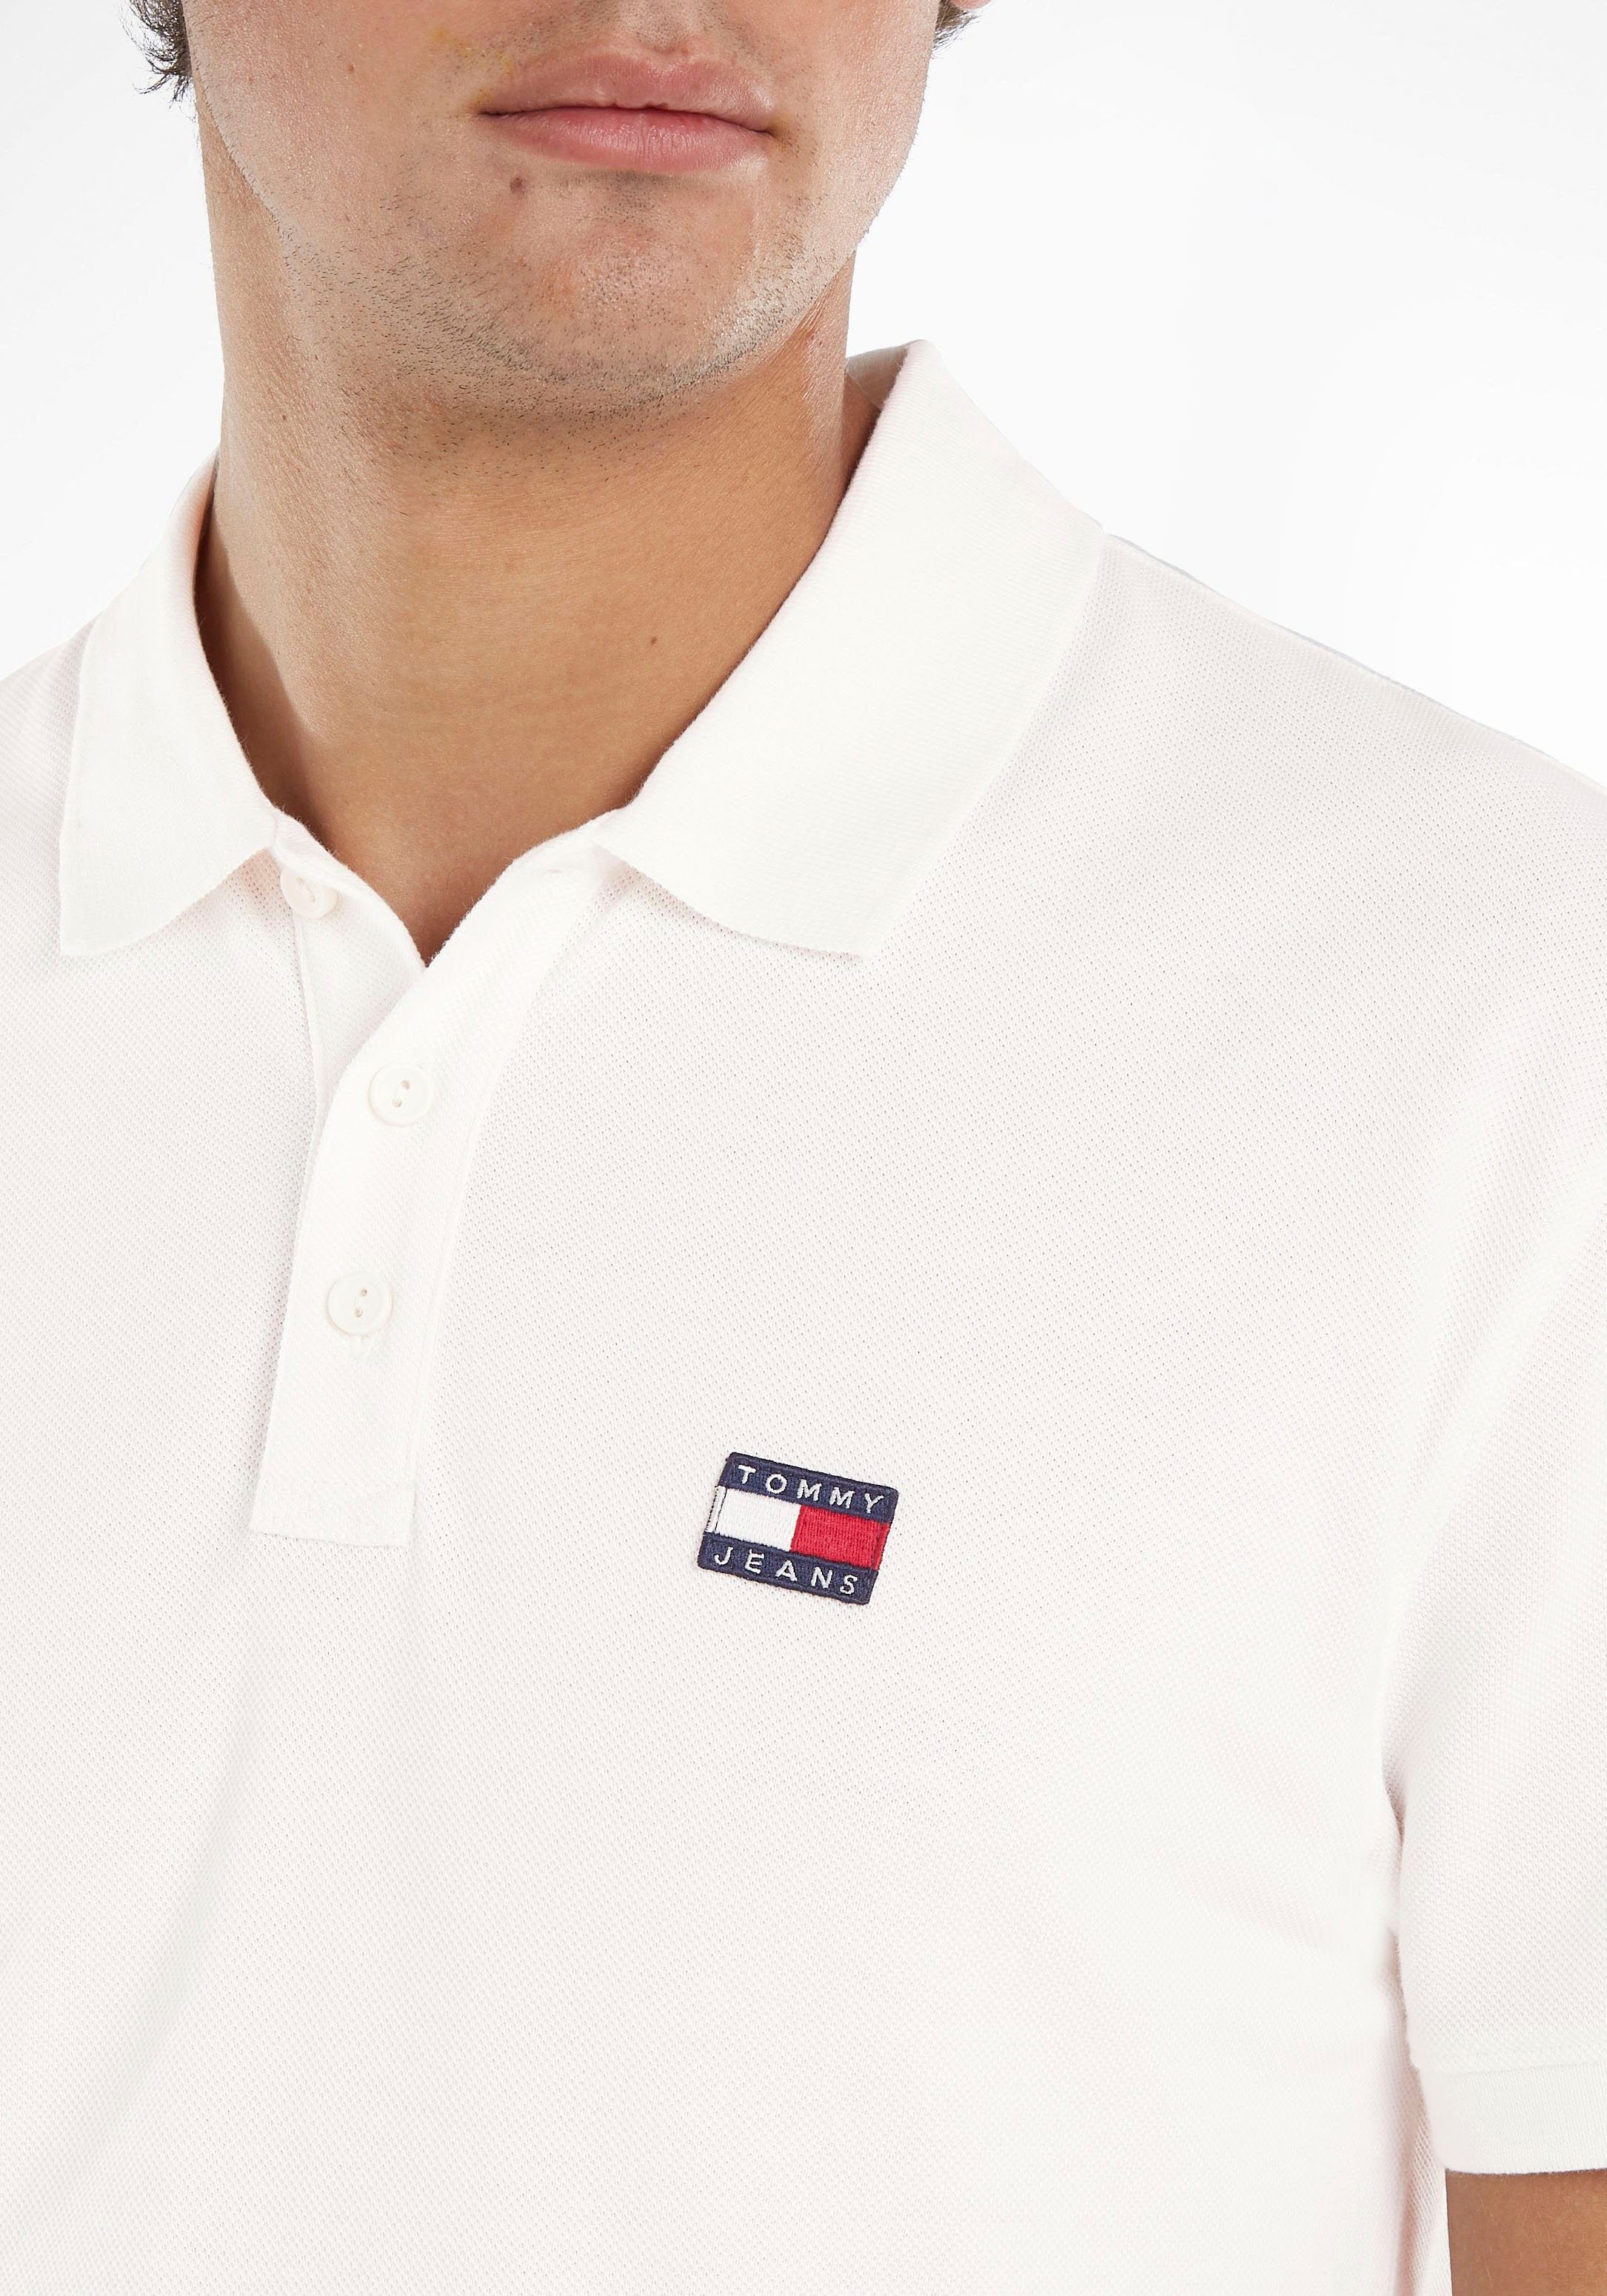 TJM BADGE Tommy Poloshirt 3-Knopf-Form mit Jeans POLO White Ancient CLSC XS